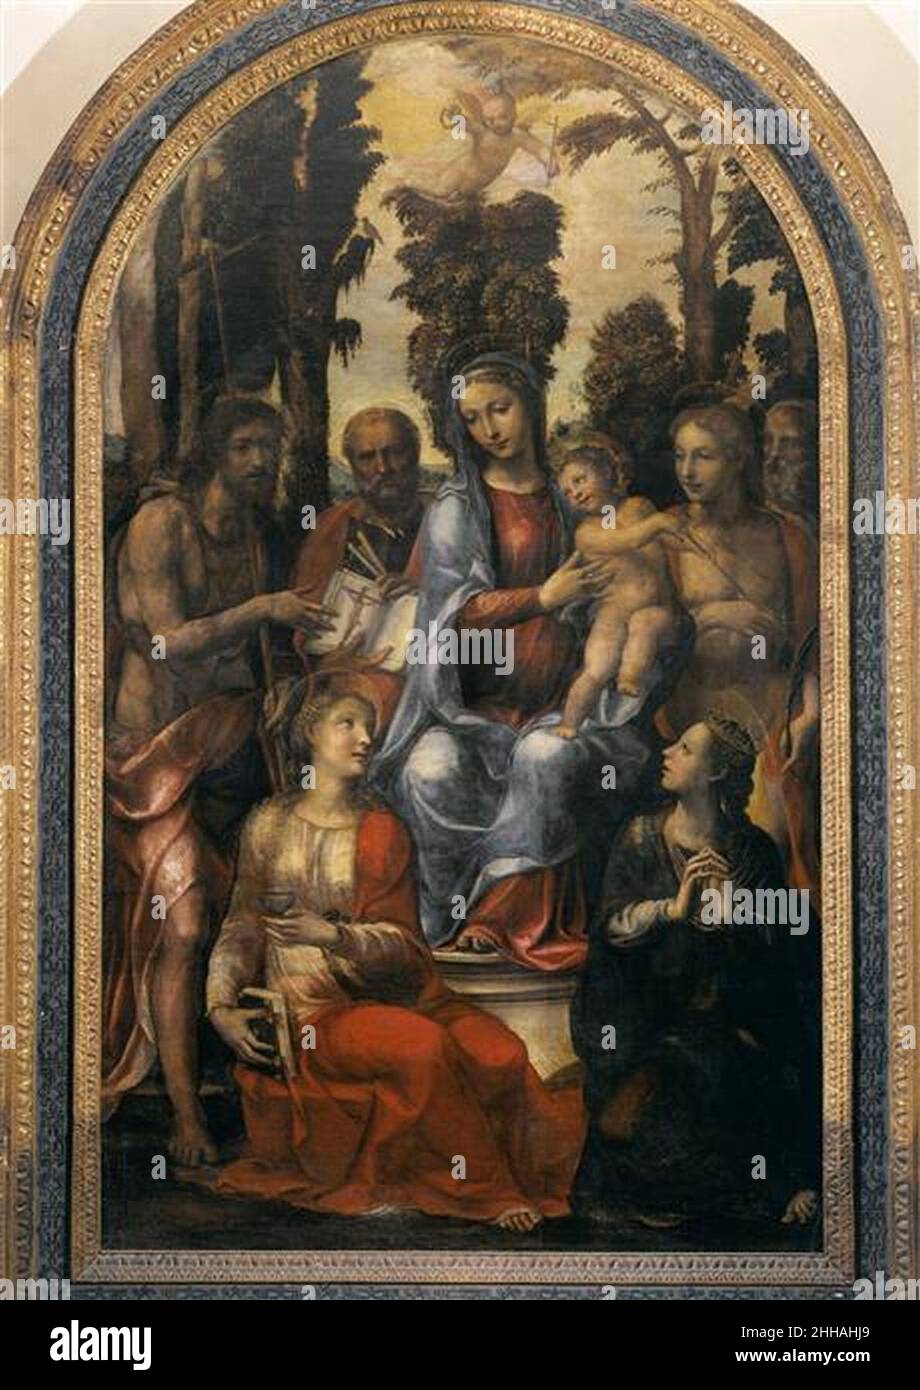 Sodoma - Madonna and Child with Saints, 21-510019. Stock Photo